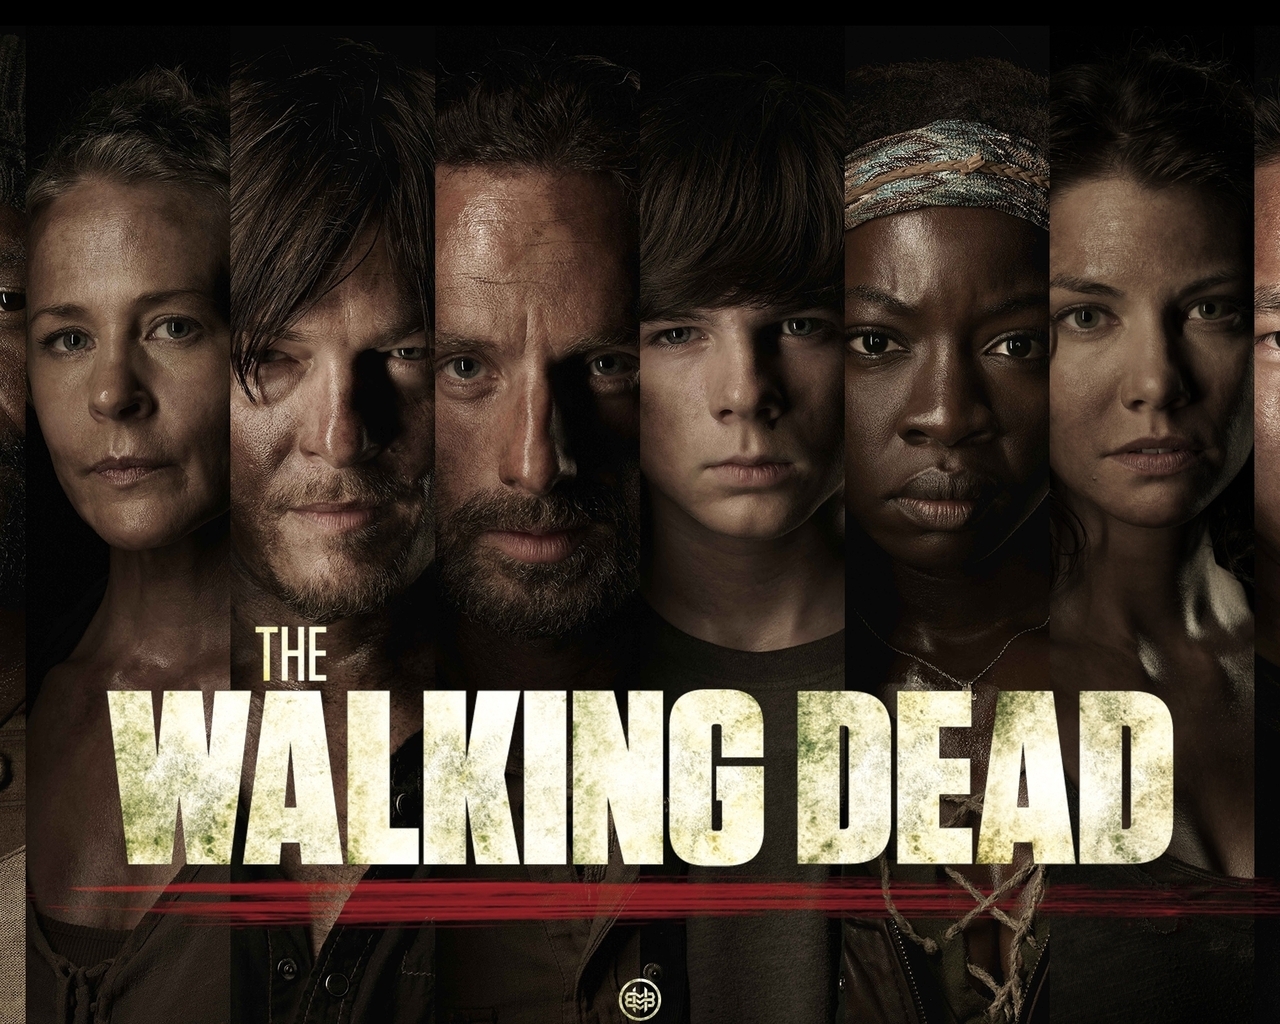 The Walking Dead Characters Poster for 1280 x 1024 resolution